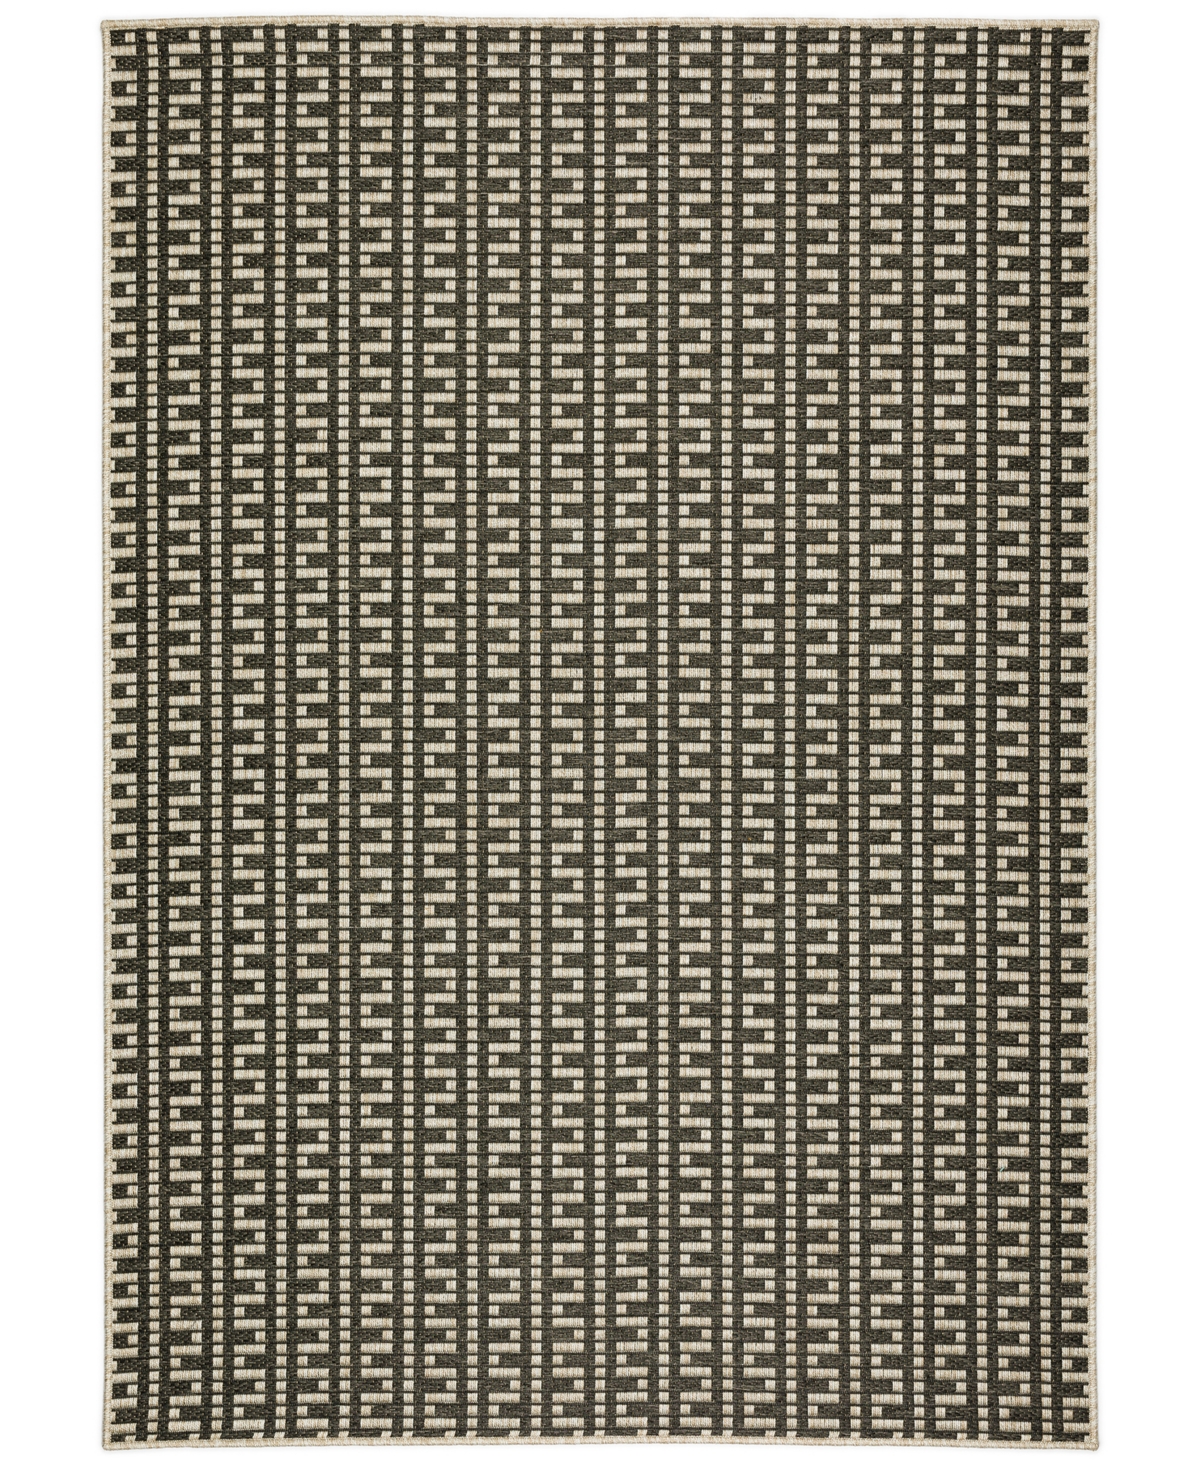 D Style Nusa Outdoor Nsa9 1'8" X 2'6" Area Rug In Charcoal